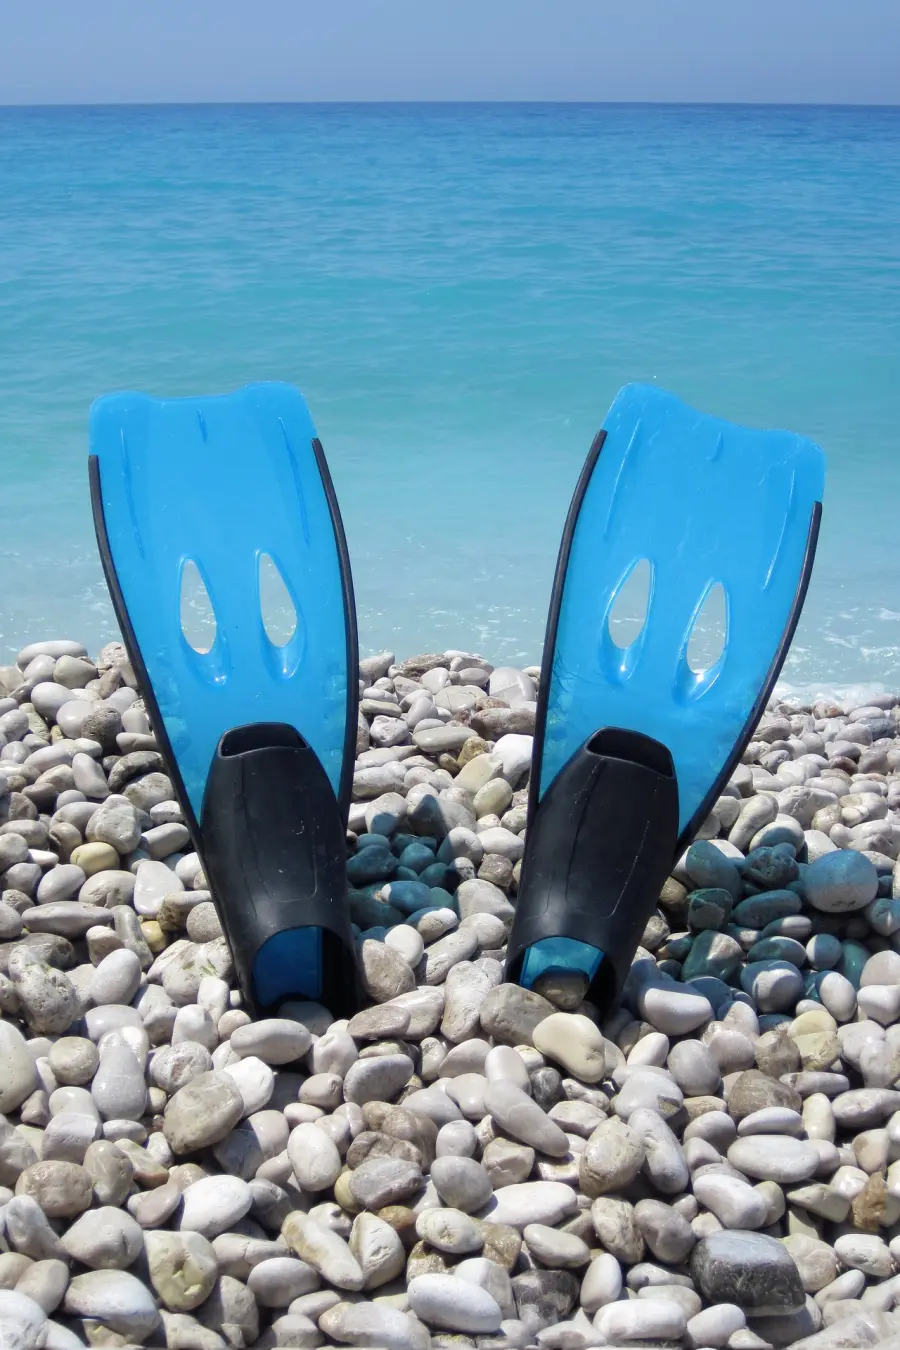 Blue swim fins on a pebble beach with the turquoise sea in the background, ready for a snorkeling adventure in Murter Island's clear waters.